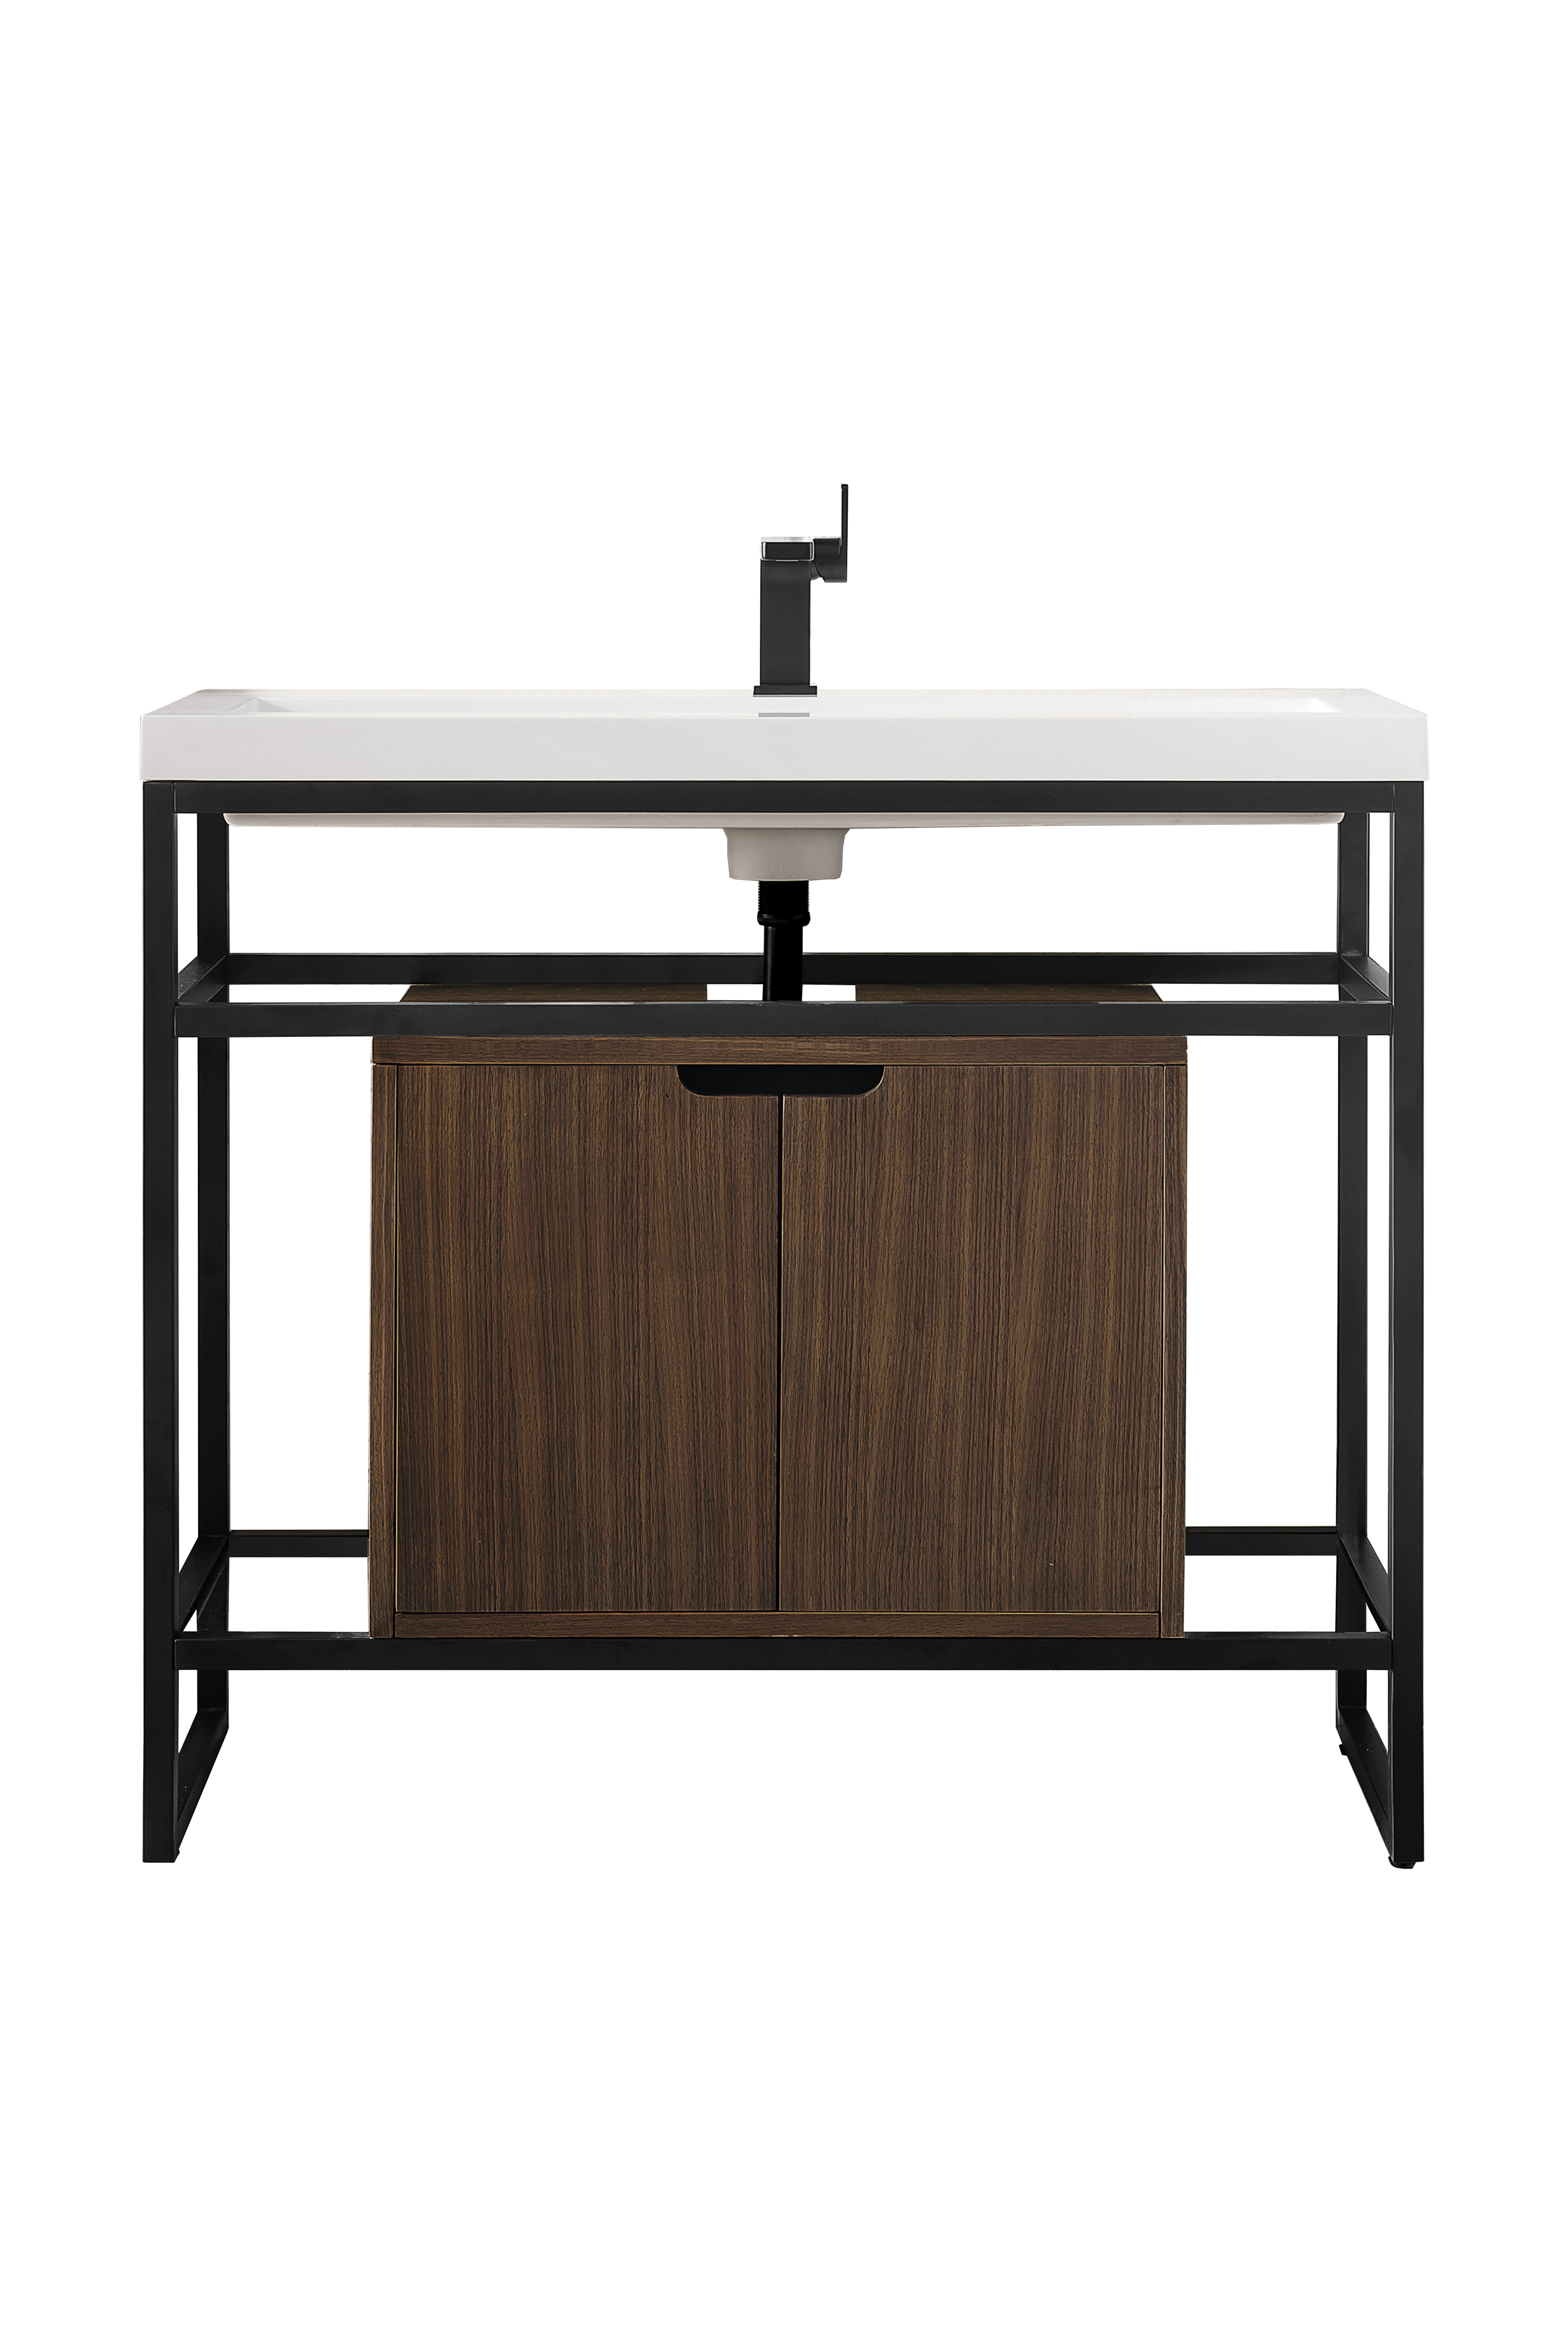 James Martin C105V39.5MBKSCWLTWG Boston 39.5" Stainless Steel Sink Console, Matte Black w/ Mid Century Walnut Storage Cabinet, White Glossy Composite Countertop